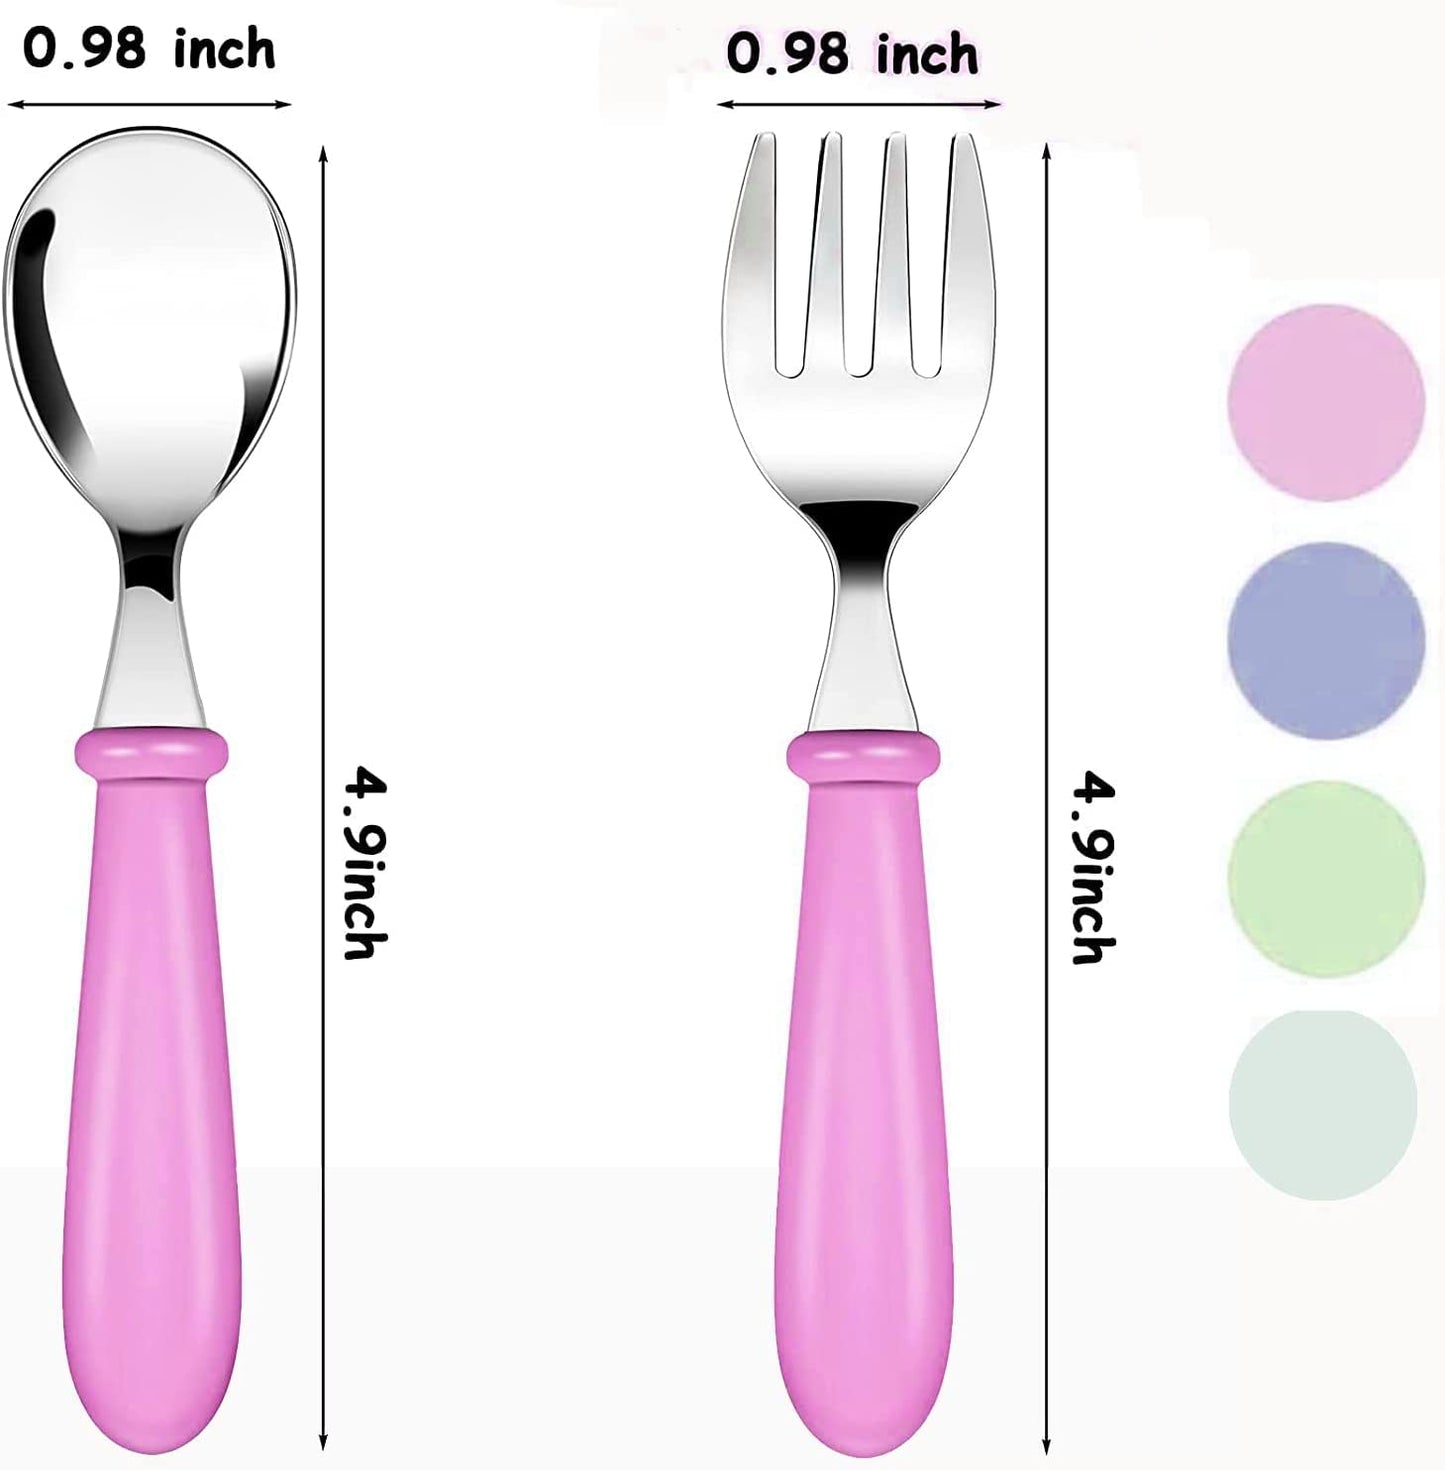 Chillout Life Toddler Utensils, Kids Silverware with Silicone Handle, Stainless Steel Metal Toddler Forks and Spoons Safe Baby Cutlery Set for Self